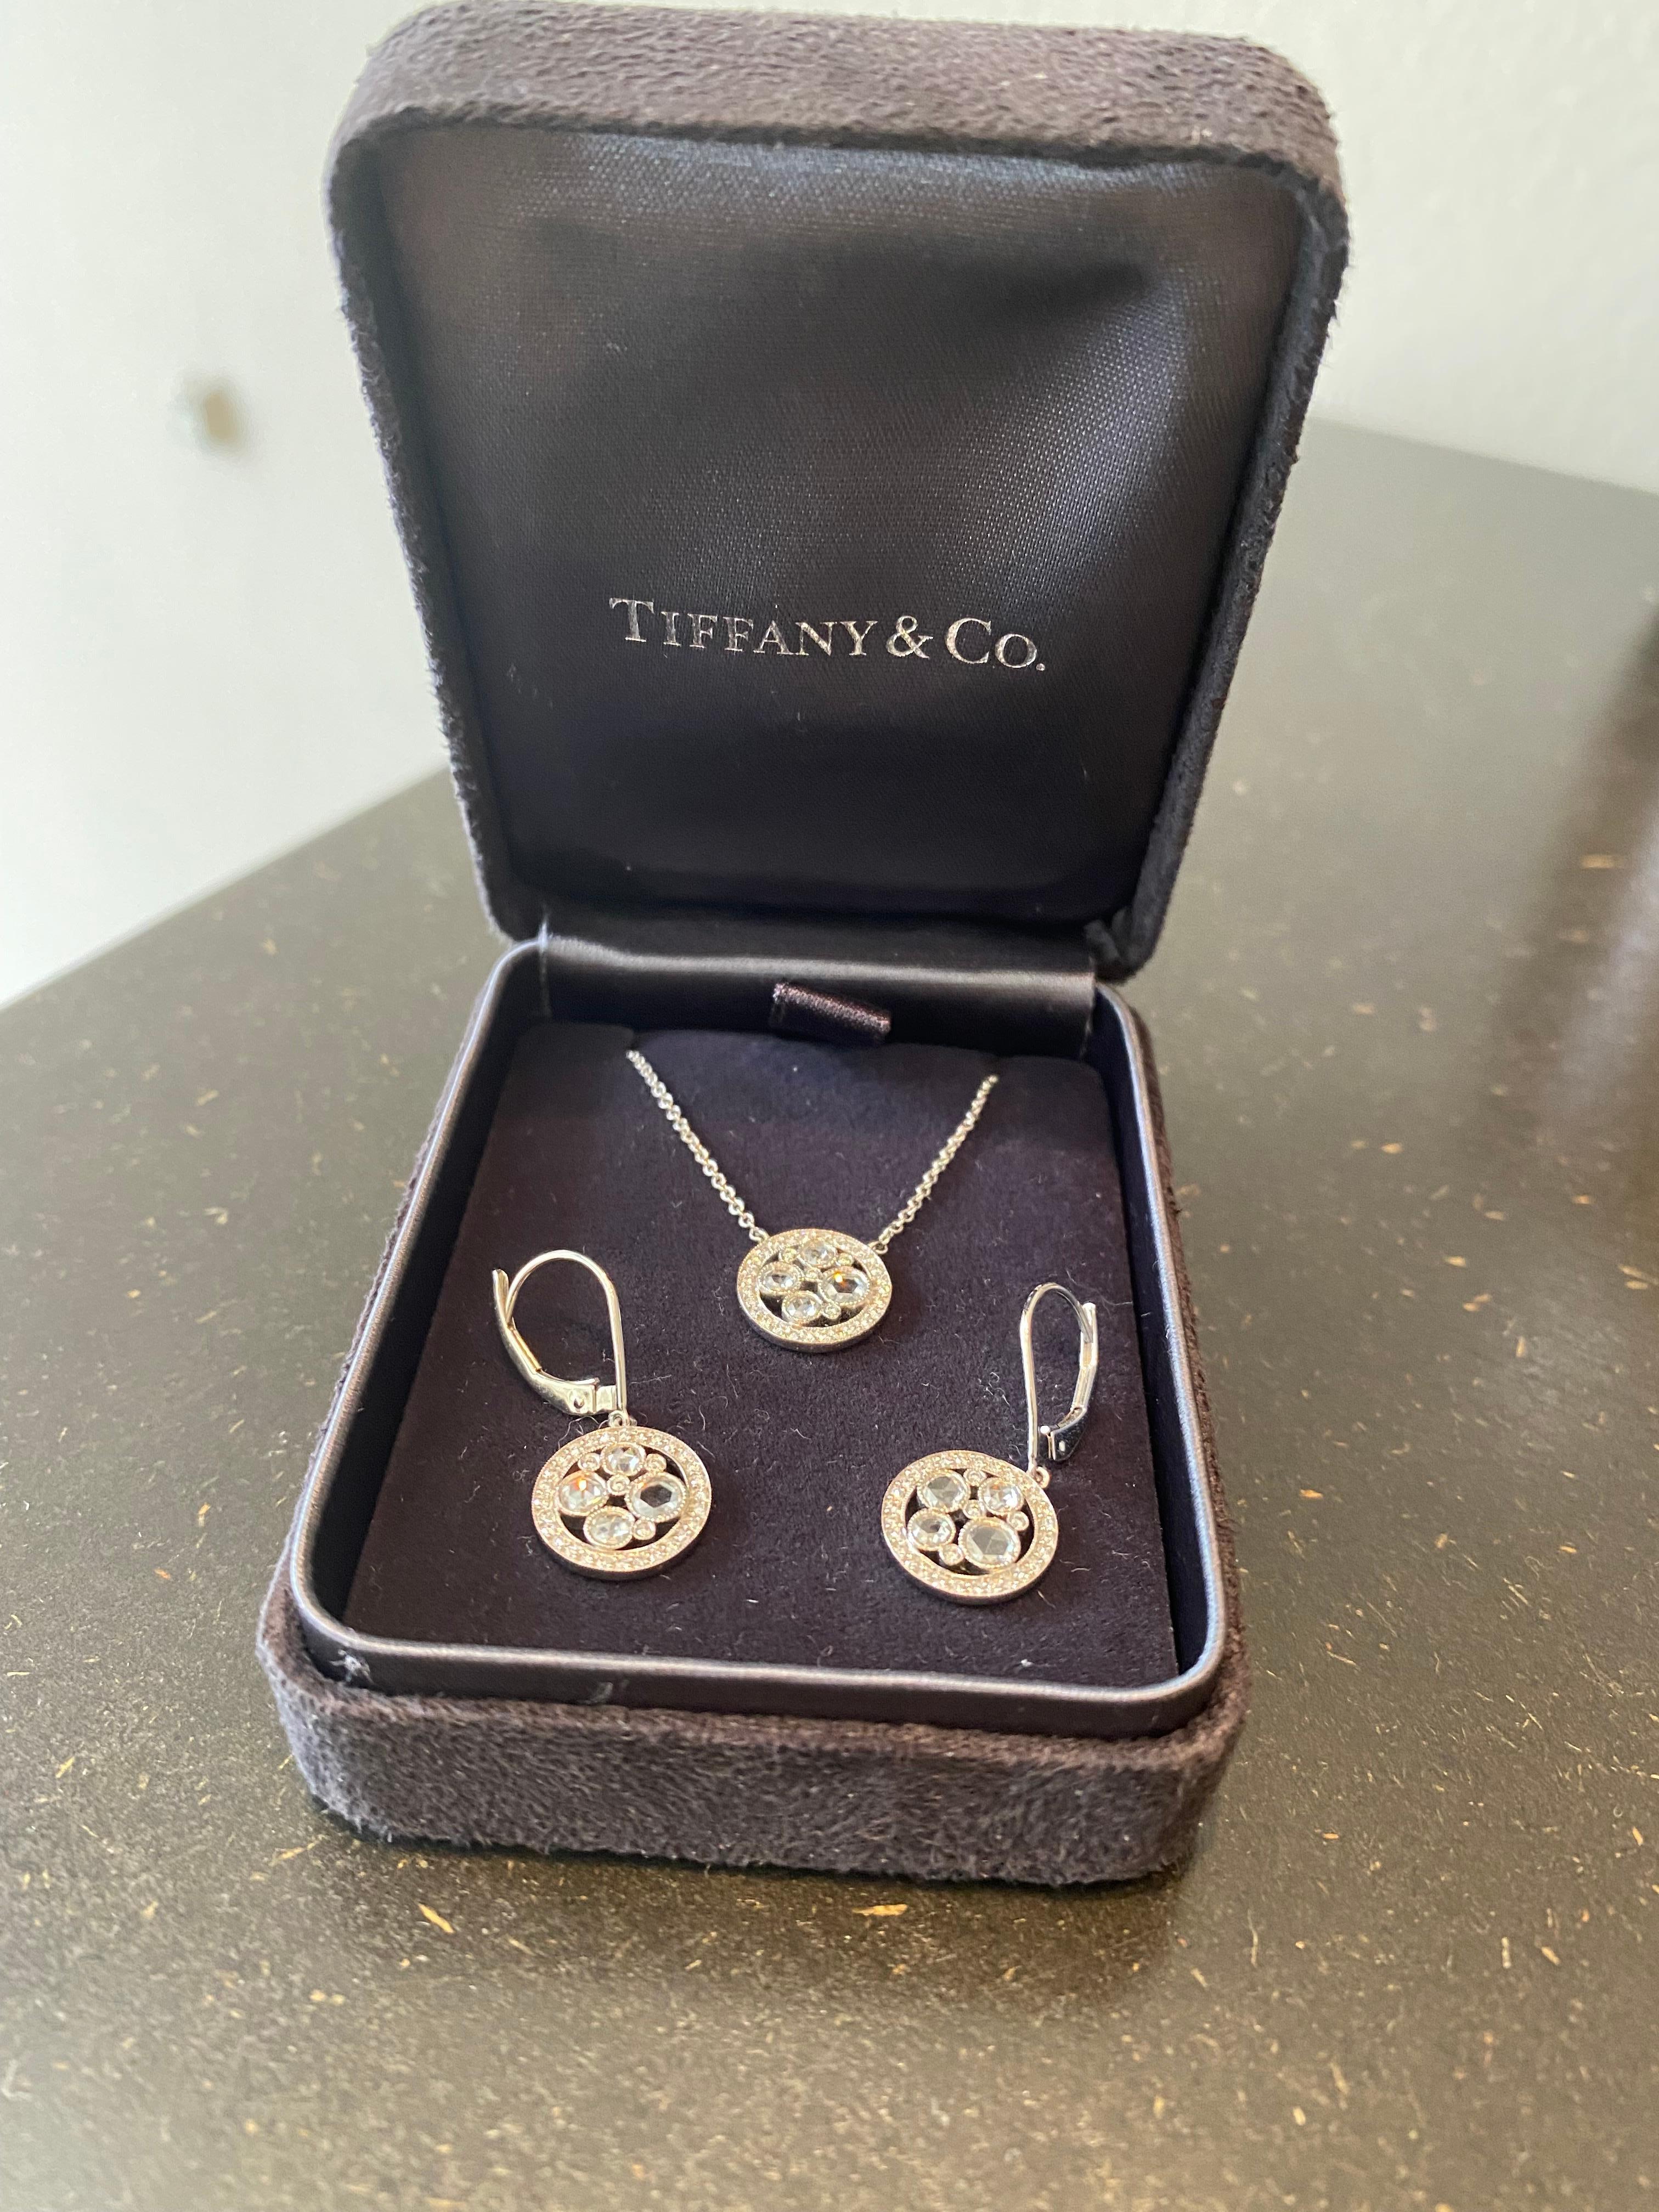 A charming set of platinum earrings and necklace by Tiffany & Co. 
The iconic jewelry House delights customers with its exquisite craftsmanship and elegance of each piece nearly for two centuries. This gentle ensemble is a perfect example of its